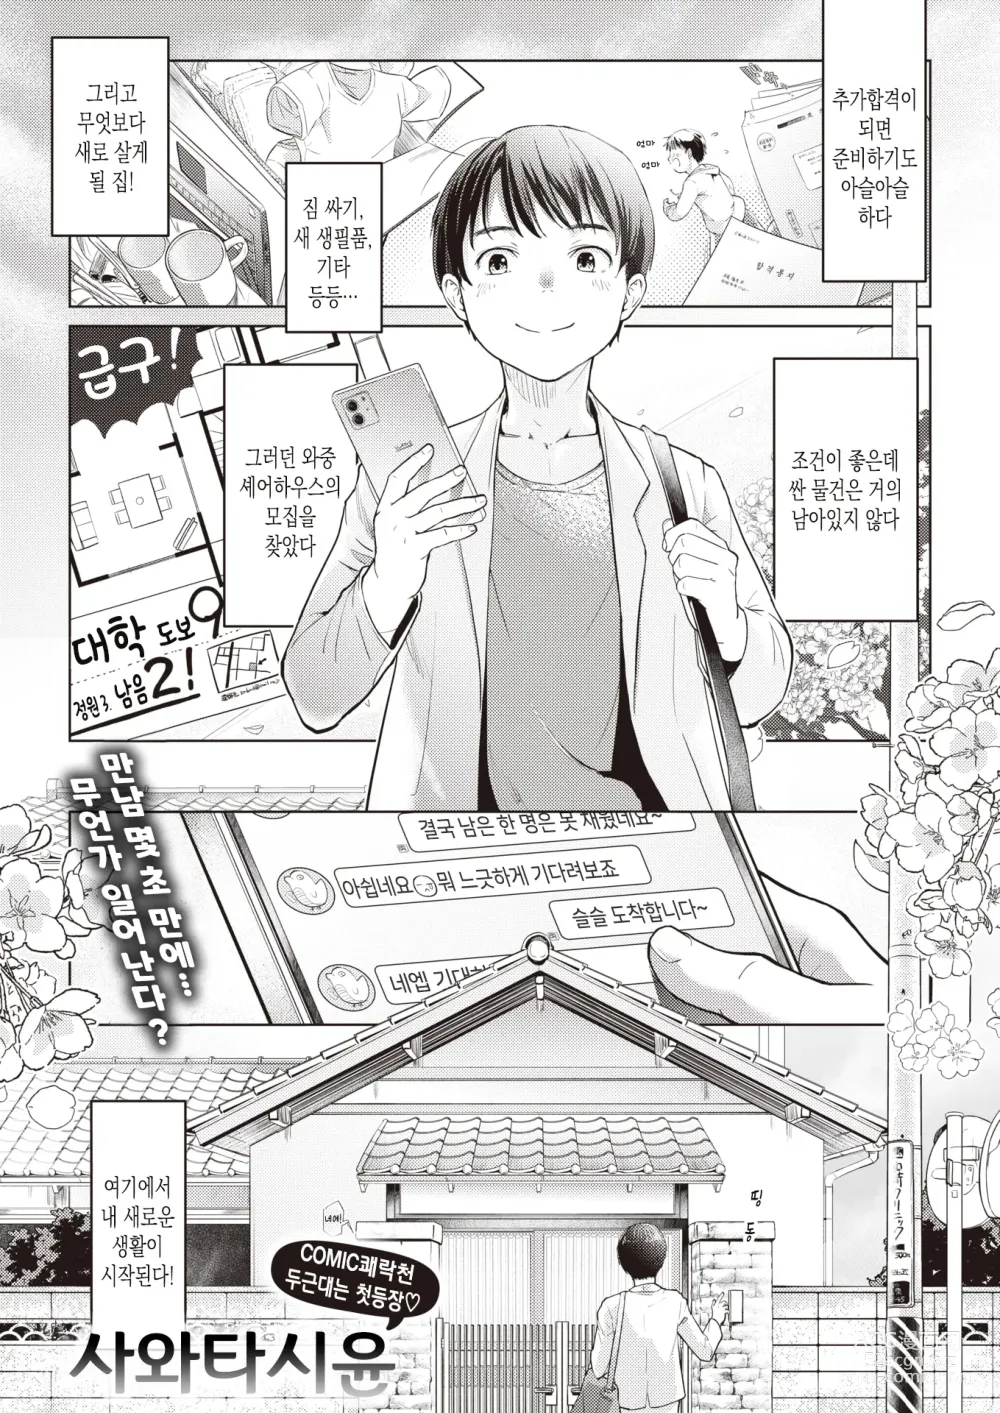 Page 1 of manga 착각누님Connect